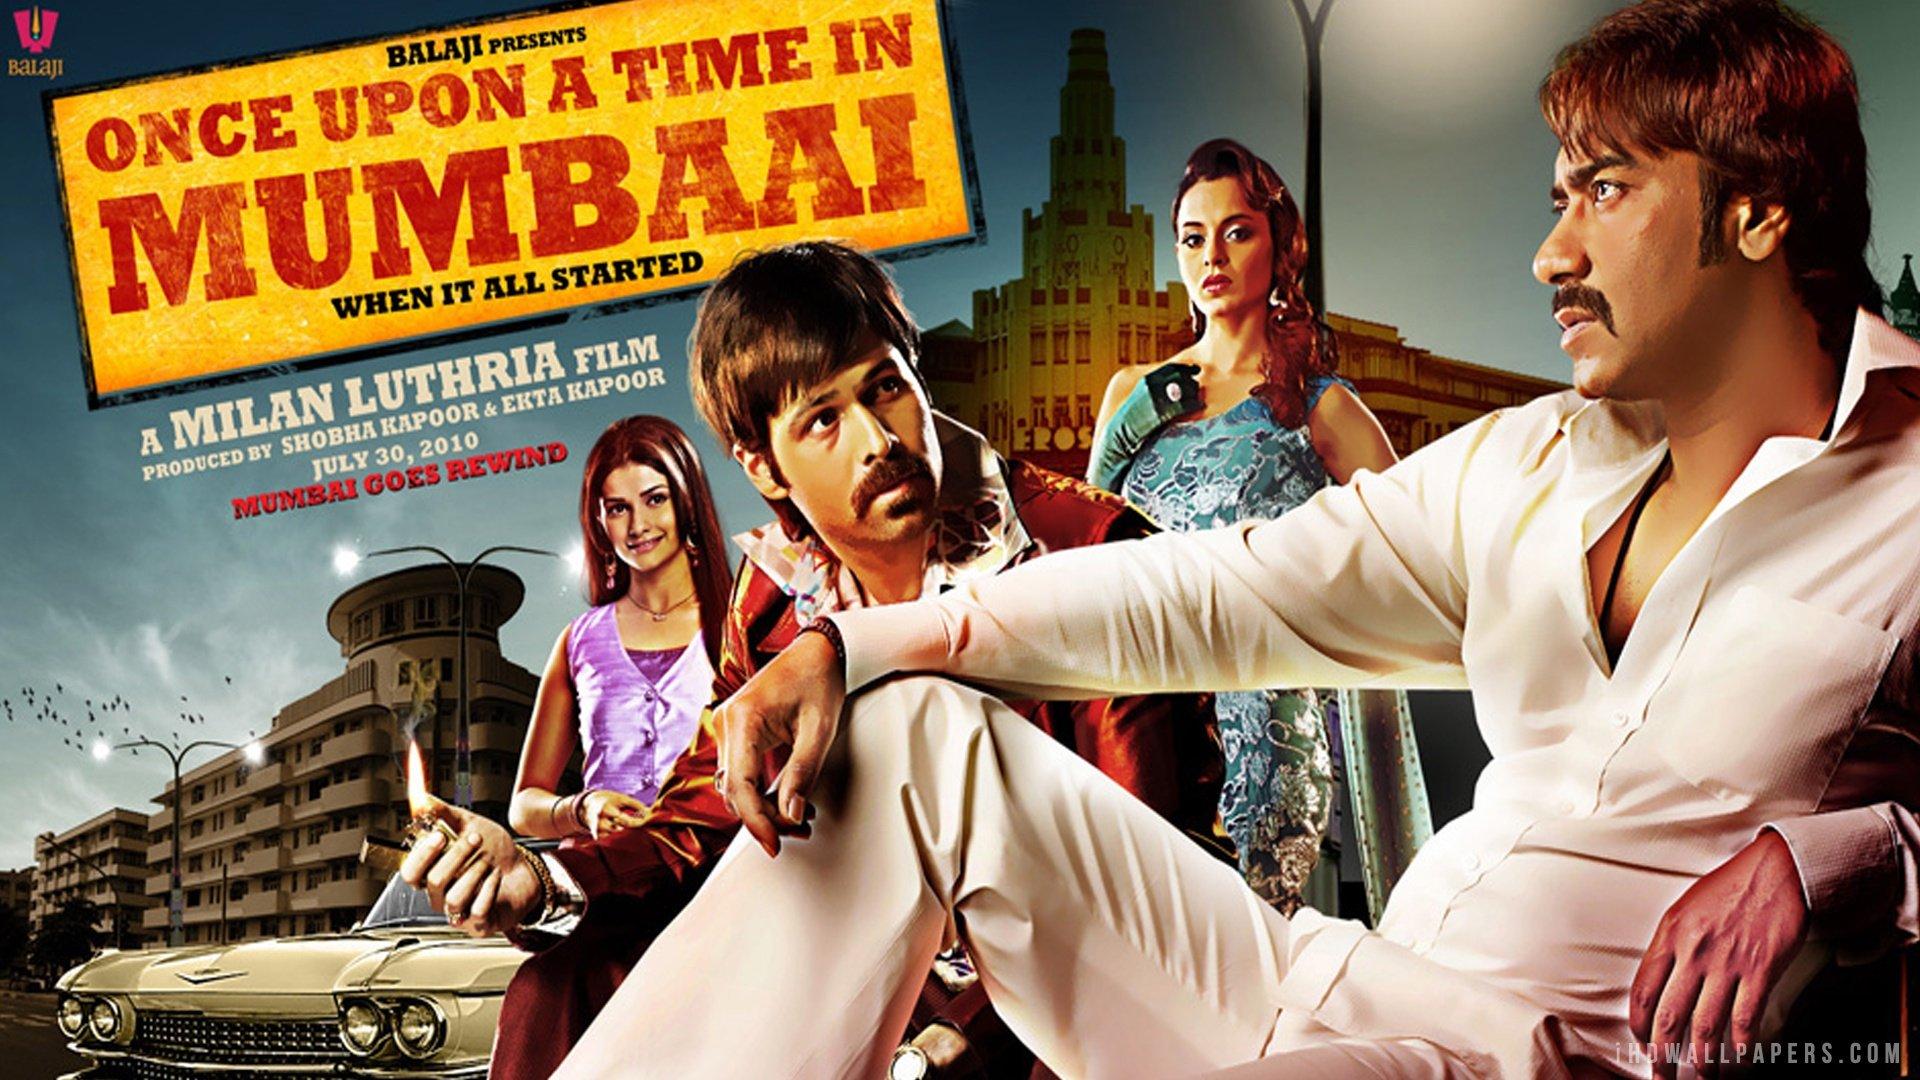 Once Upon a Time in Mumbaai: This film provides a fascinating glimpse into the underworld of Mumbai during the 1970s. Emraan Hashmi's portrayal of Shoaib Khan, a young and ambitious gangster, is both menacing and captivating. 